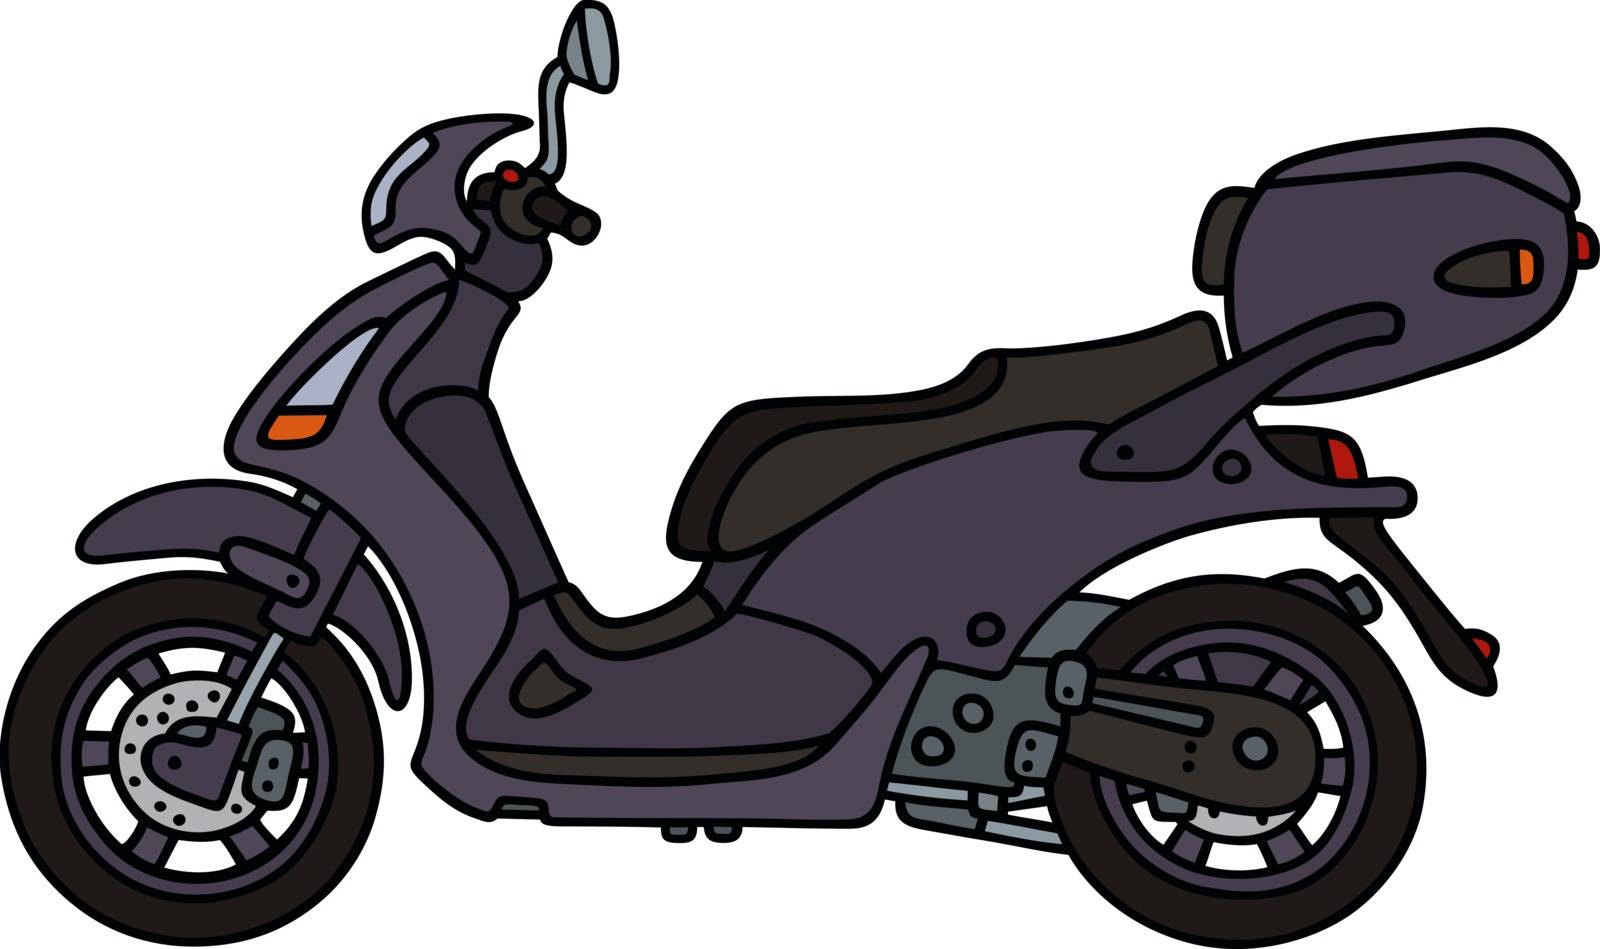 Hand drawing of a dark violet scooter - not a real model